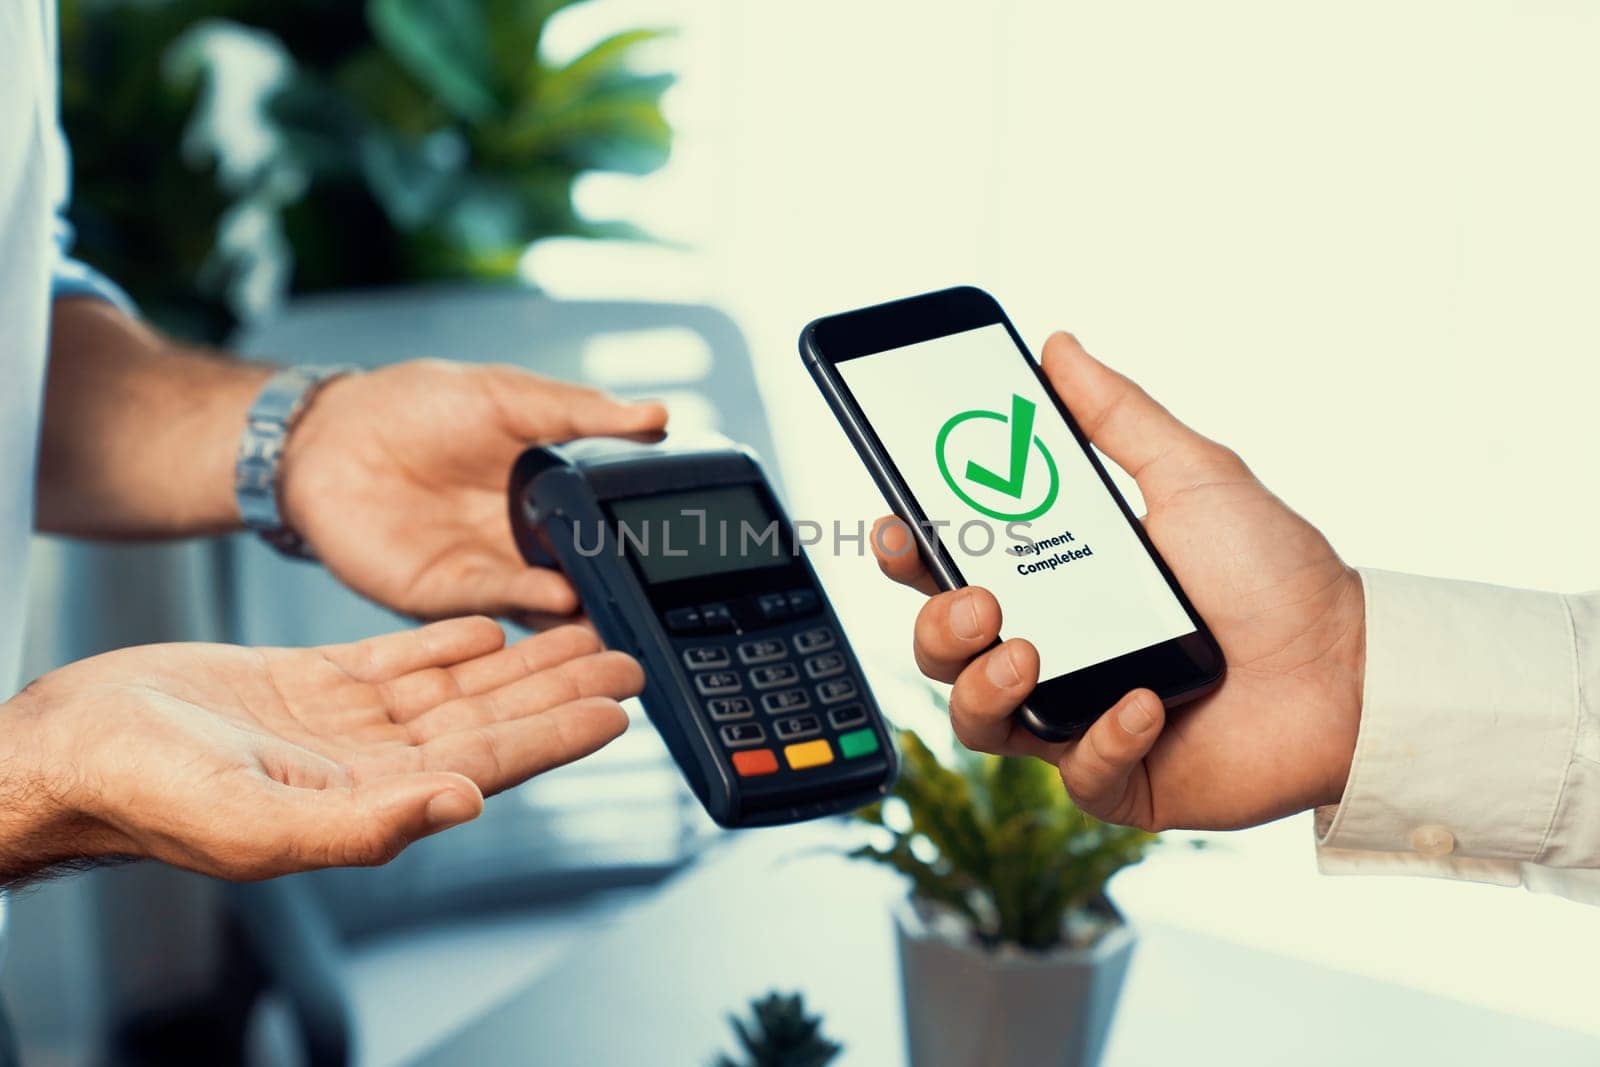 Hand holding smartphone with NFC QR code device, scanning contactless payment code for fast digital transaction. Online banking app on mobile phone for modern lifestyle payment technology. fervent